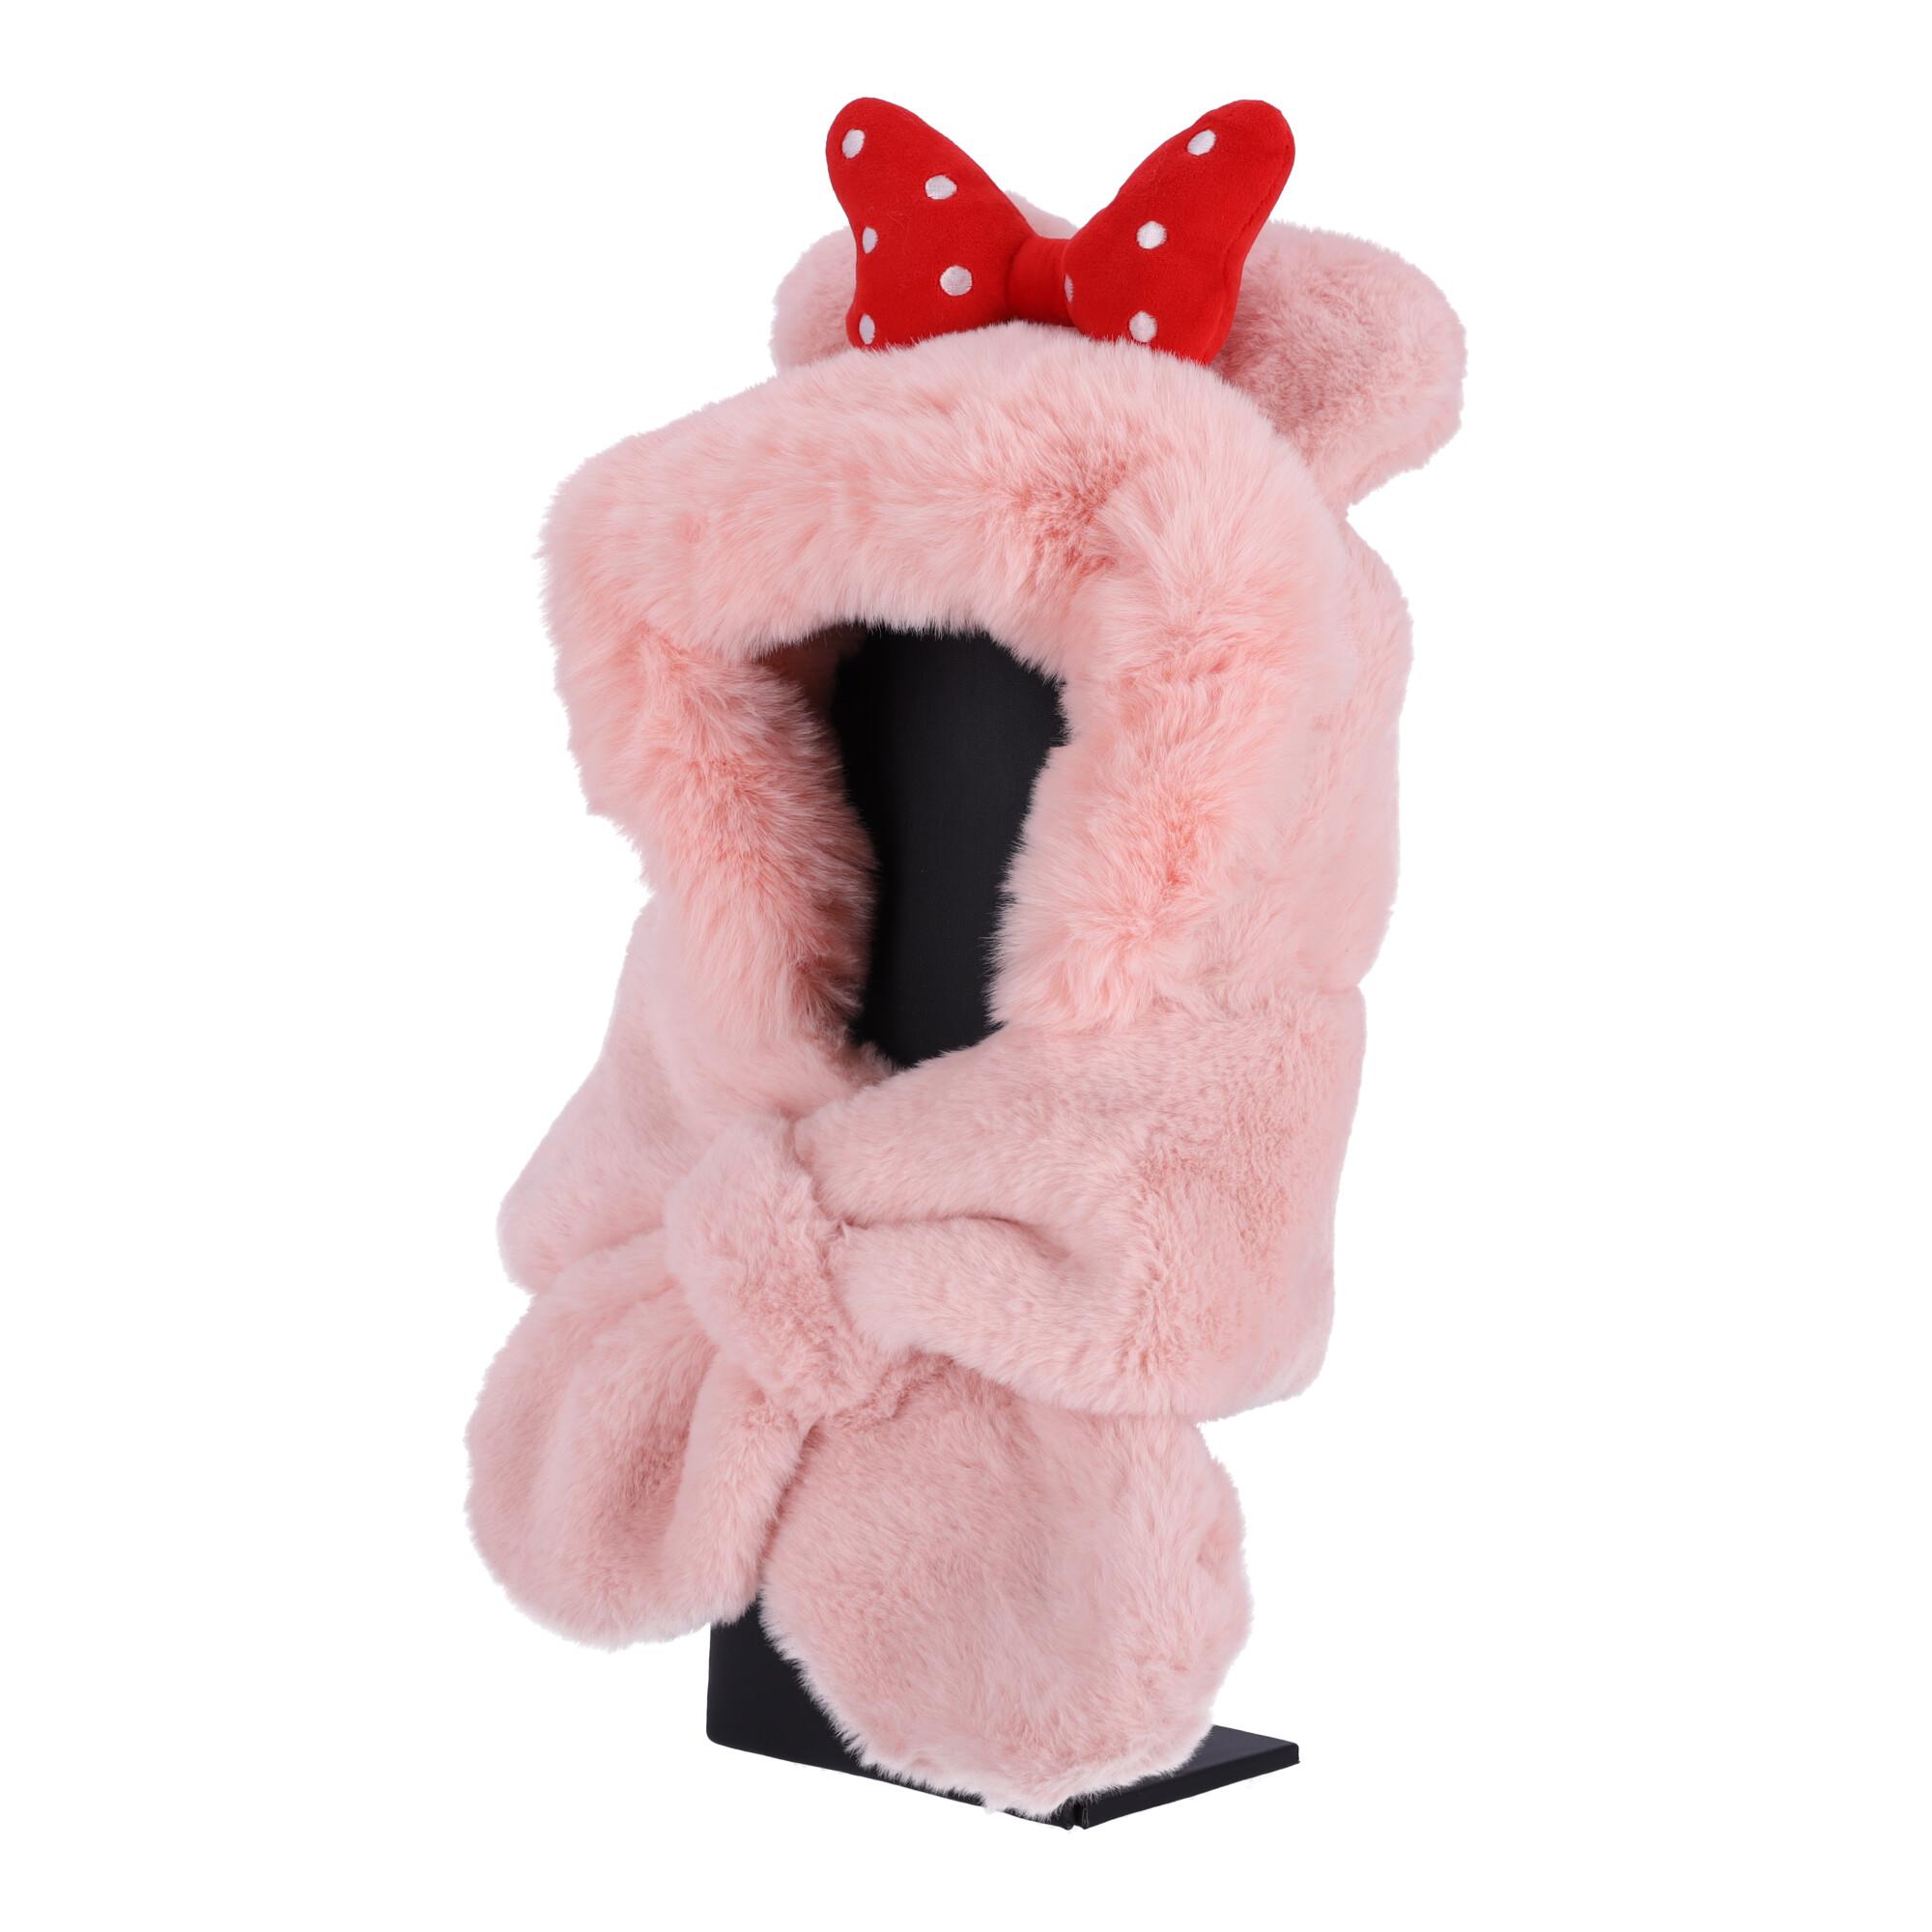 Children's plush hat with a scarf for children aged 1 to 8 - pink with a red bow